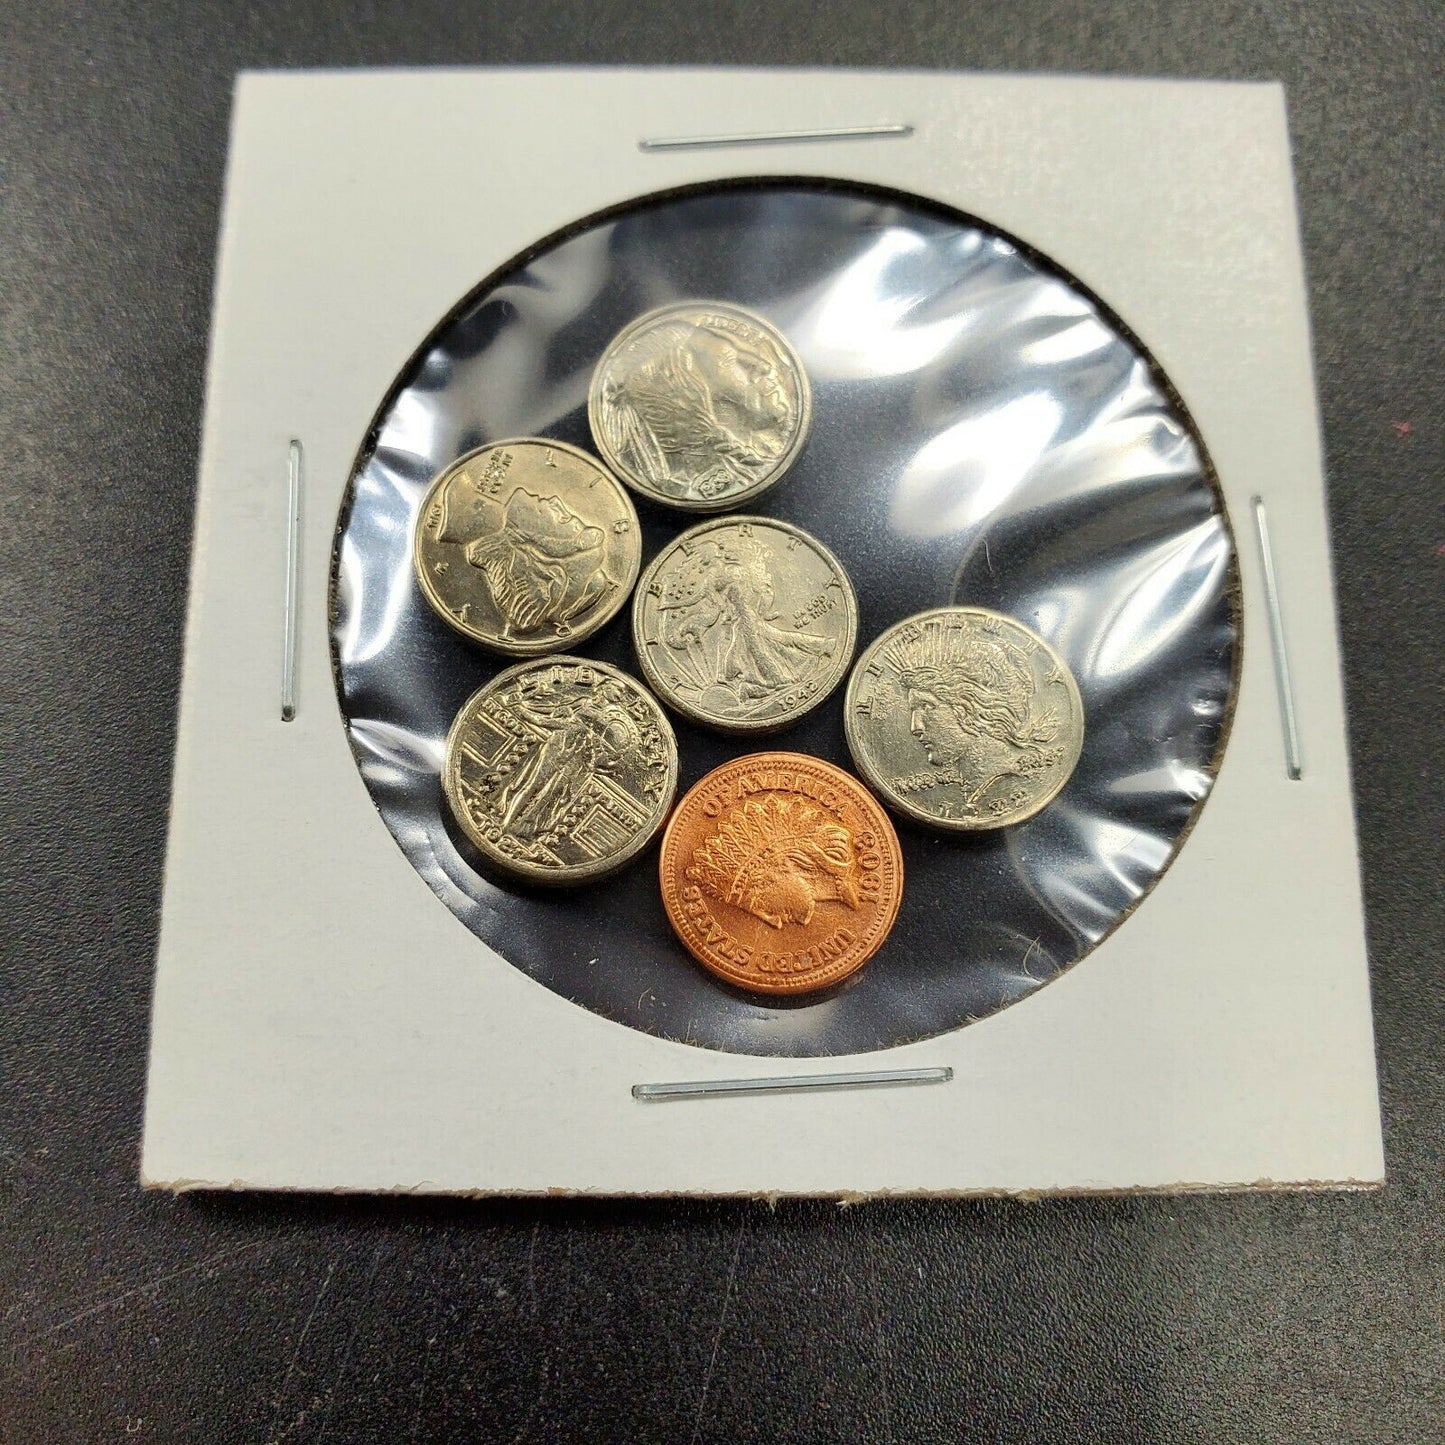 MINIATURE U.S. MINT SET GEM UNC NOVELTY 6 COINS VARYING YEARS CLASSIC INFLATION